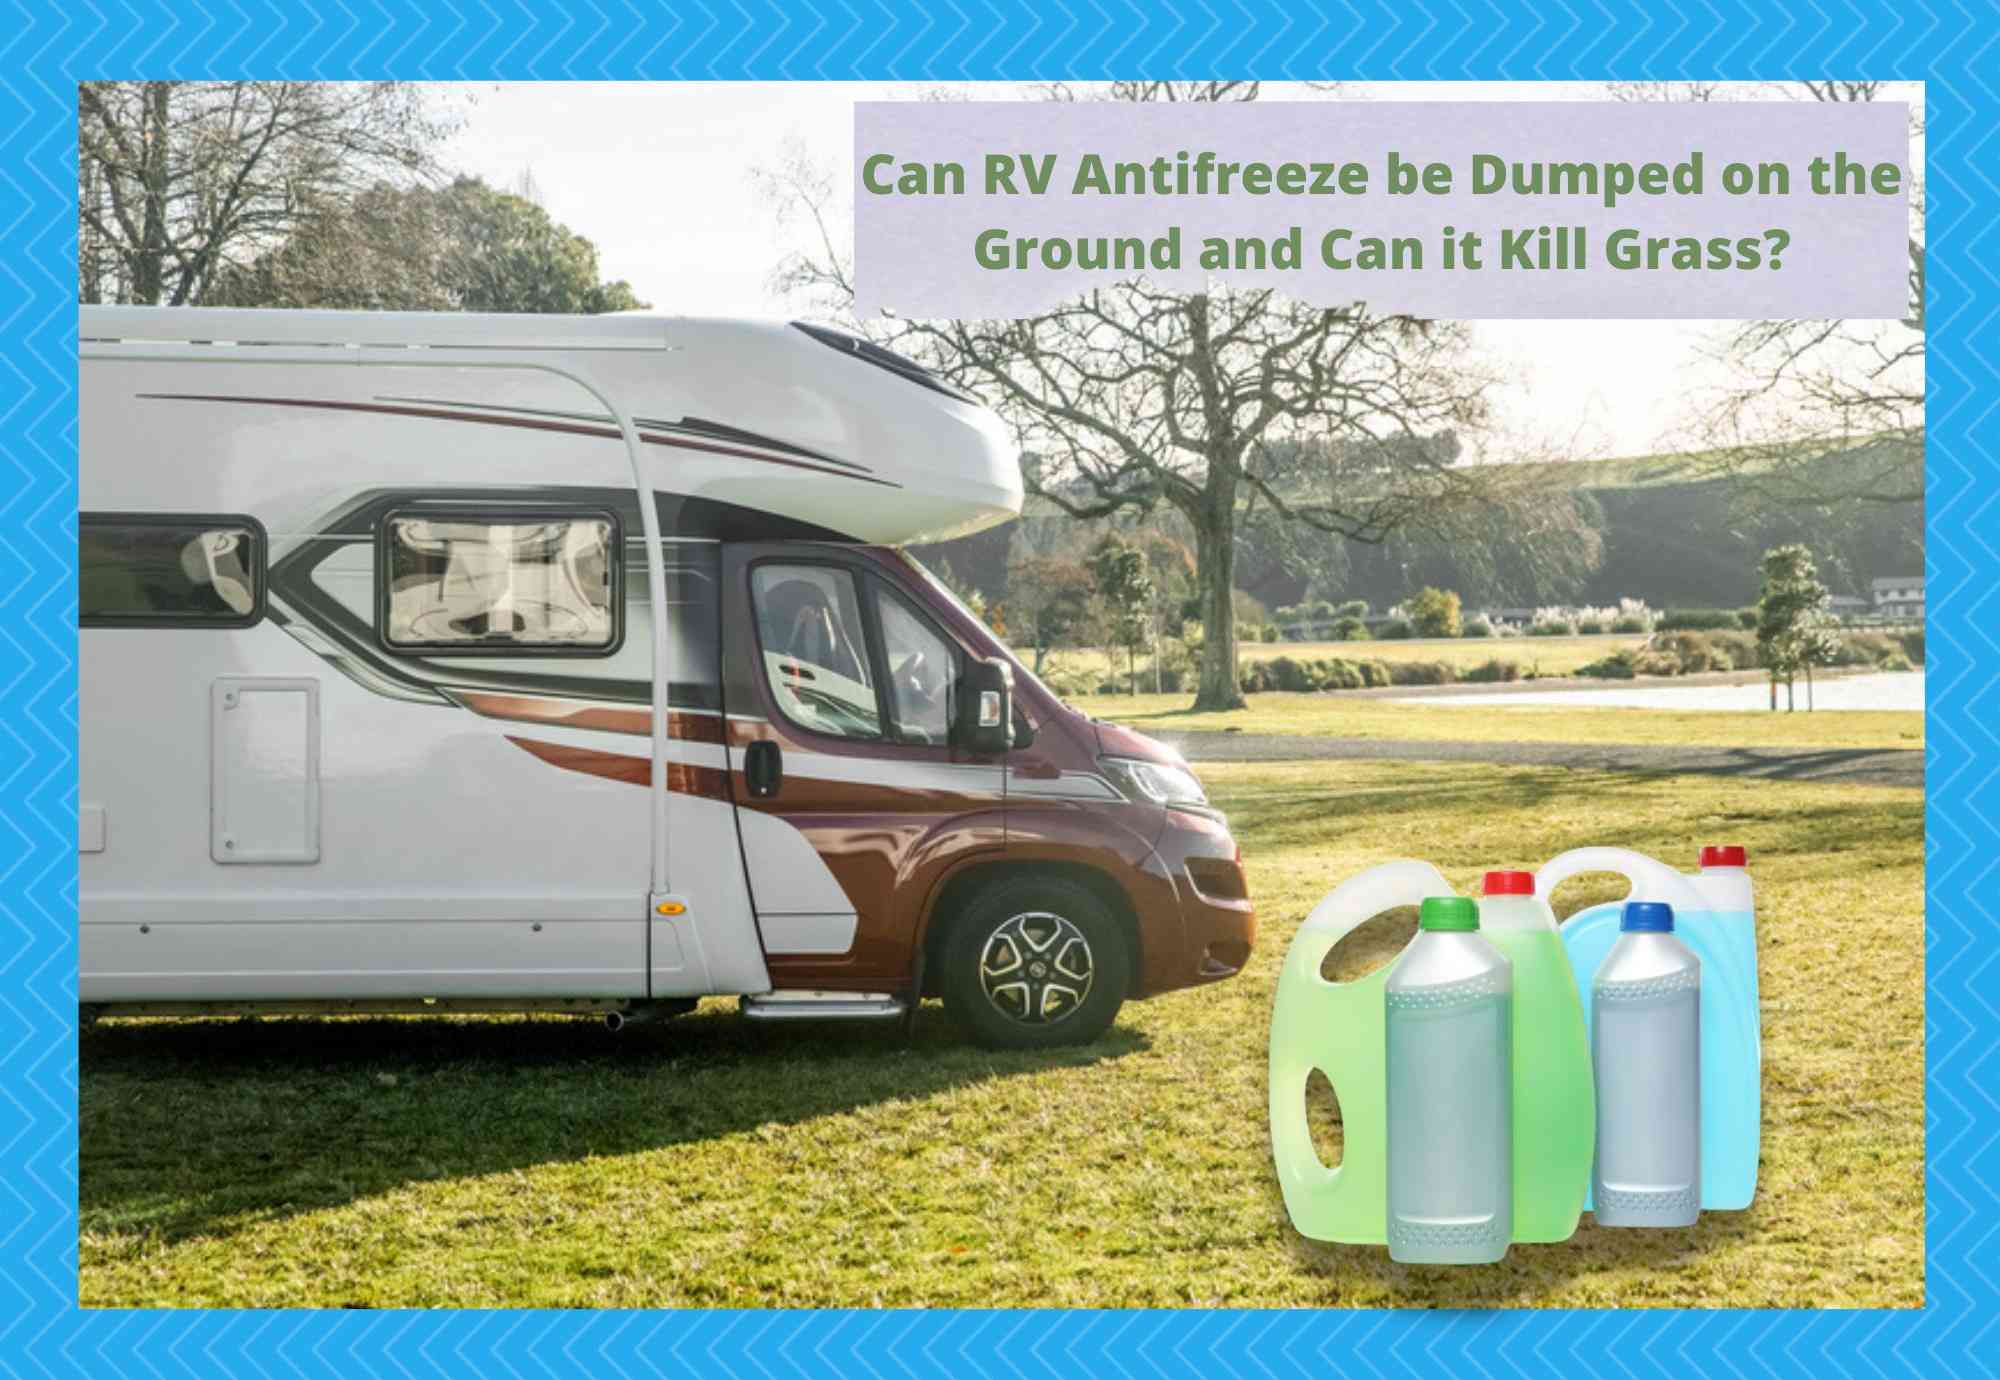 Can RV Antifreeze be Dumped on the Ground and Can it Kill Grass?